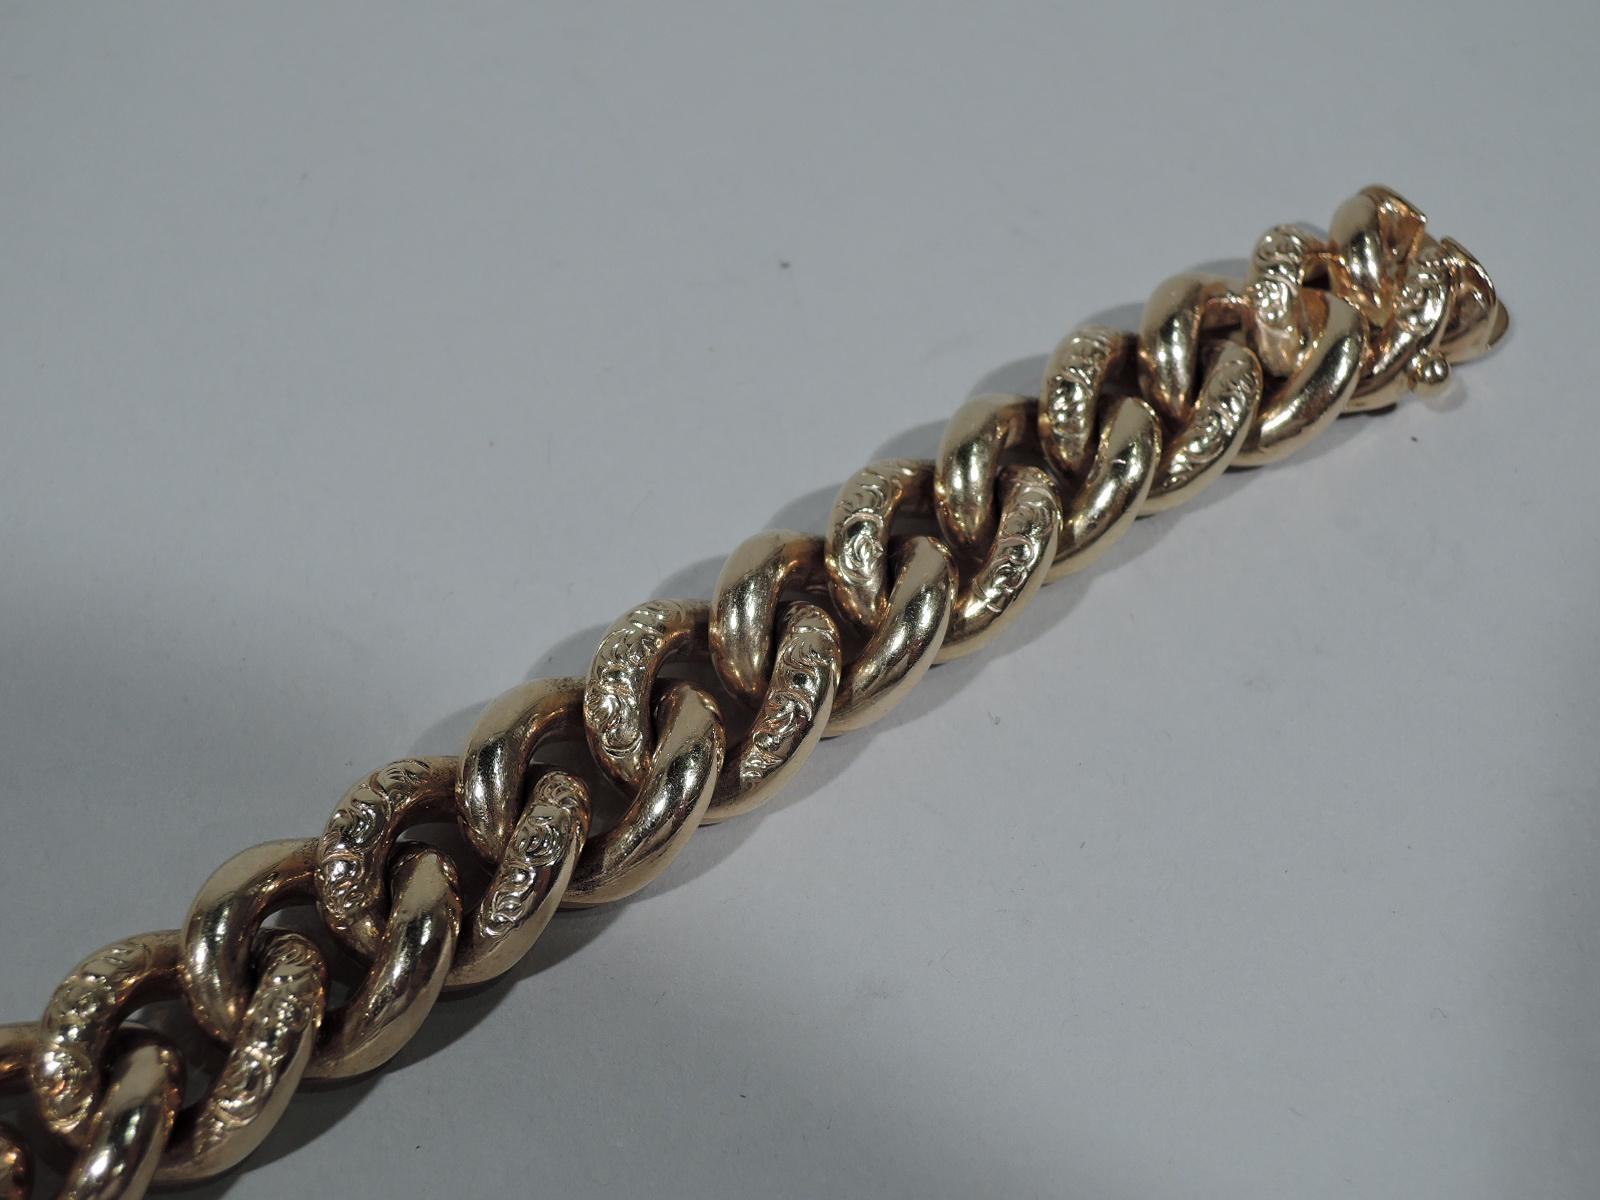 Edwardian 10k gold chain bracelet comprising alternating plain and ornamented links. The ornamented links have tooled scrollwork. England, ca 1910. Marked. Heavy weight.